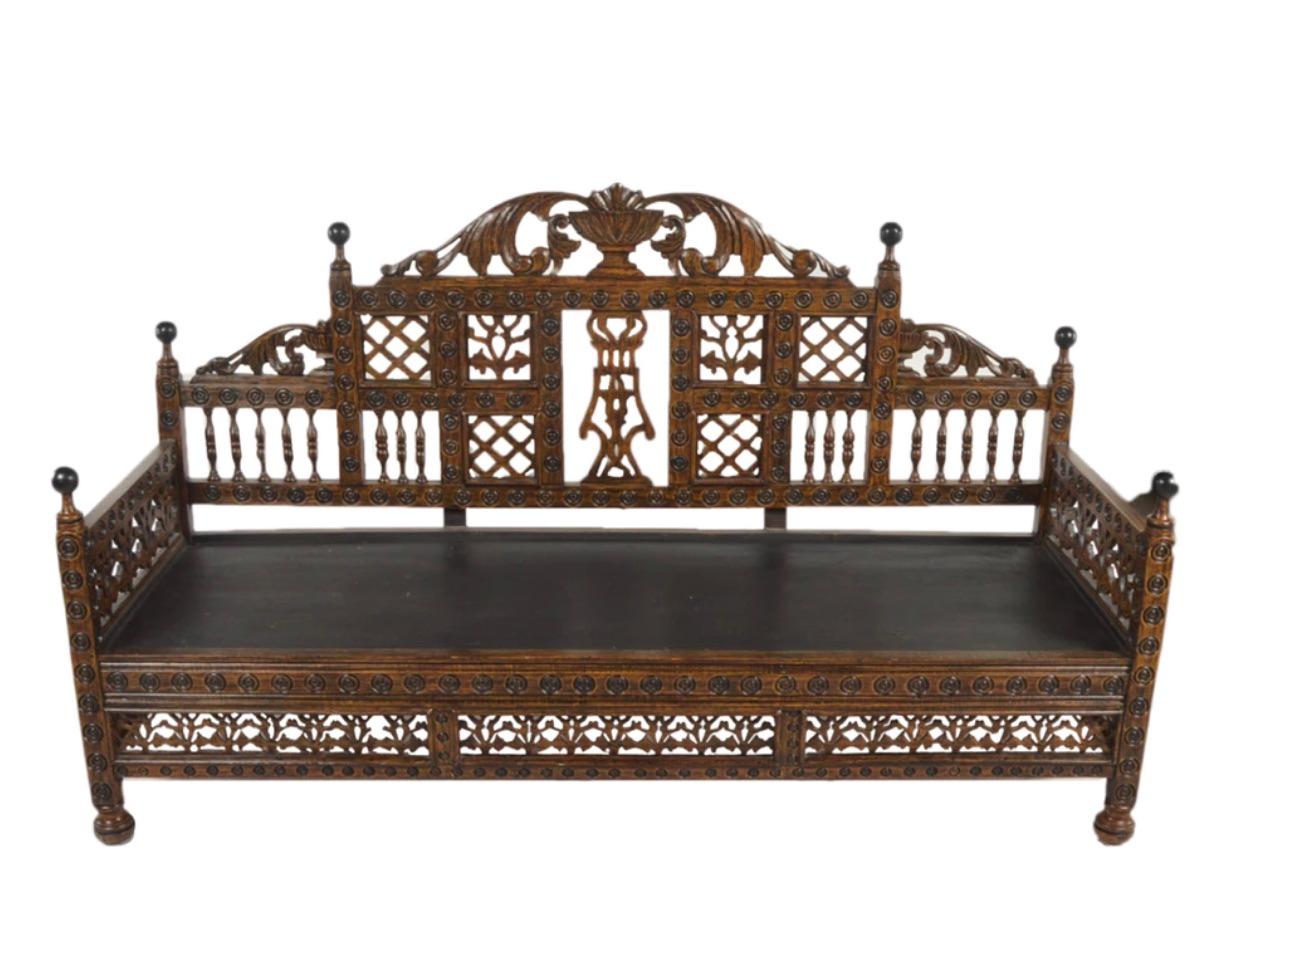  Gorgeous Anglo Indian, Moroccan style sofa with a beautiful subtle Moorish design upholstery,  designed for Royalty!

The Sofa Settee is beautiful and highly decorative- a shaped crest rail with carved embellishments featuring urn and acanthus leaf